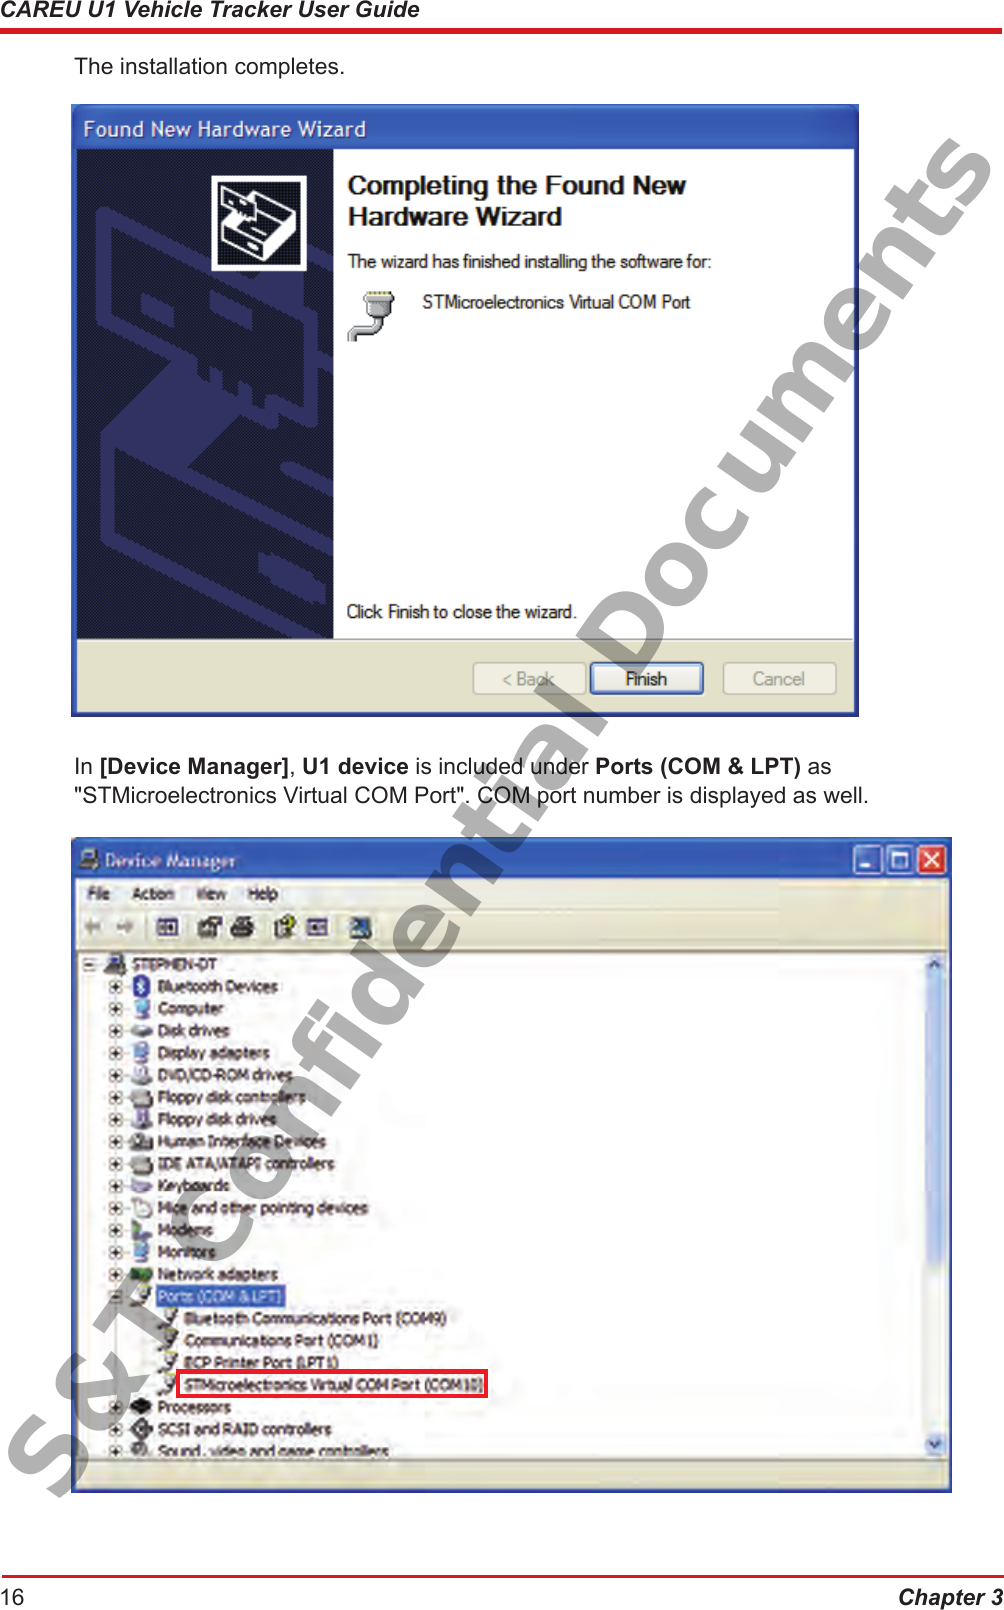 Chapter 316CAREU U1 Vehicle Tracker User Guide  The installation completes.       In [Device Manager], U1 device is included under Ports (COM &amp; LPT) as        &quot;STMicroelectronics Virtual COM Port&quot;. COM port number is displayed as well.S&amp;T Confidential Documents